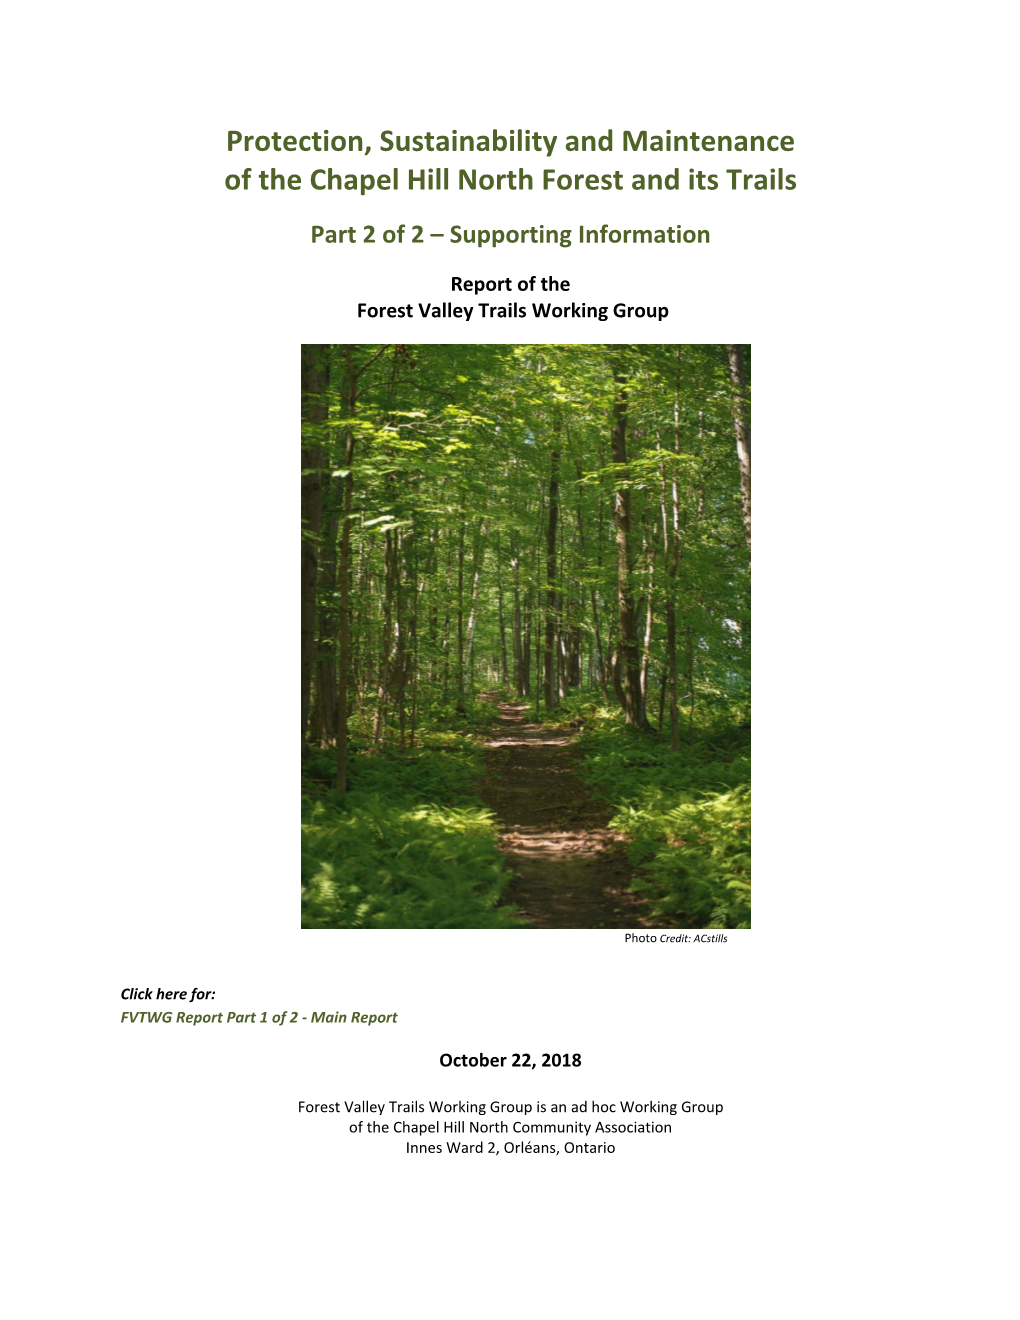 Protection, Sustainability and Maintenance of the Chapel Hill North Forest and Its Trails Part 2 of 2 – Supporting Information